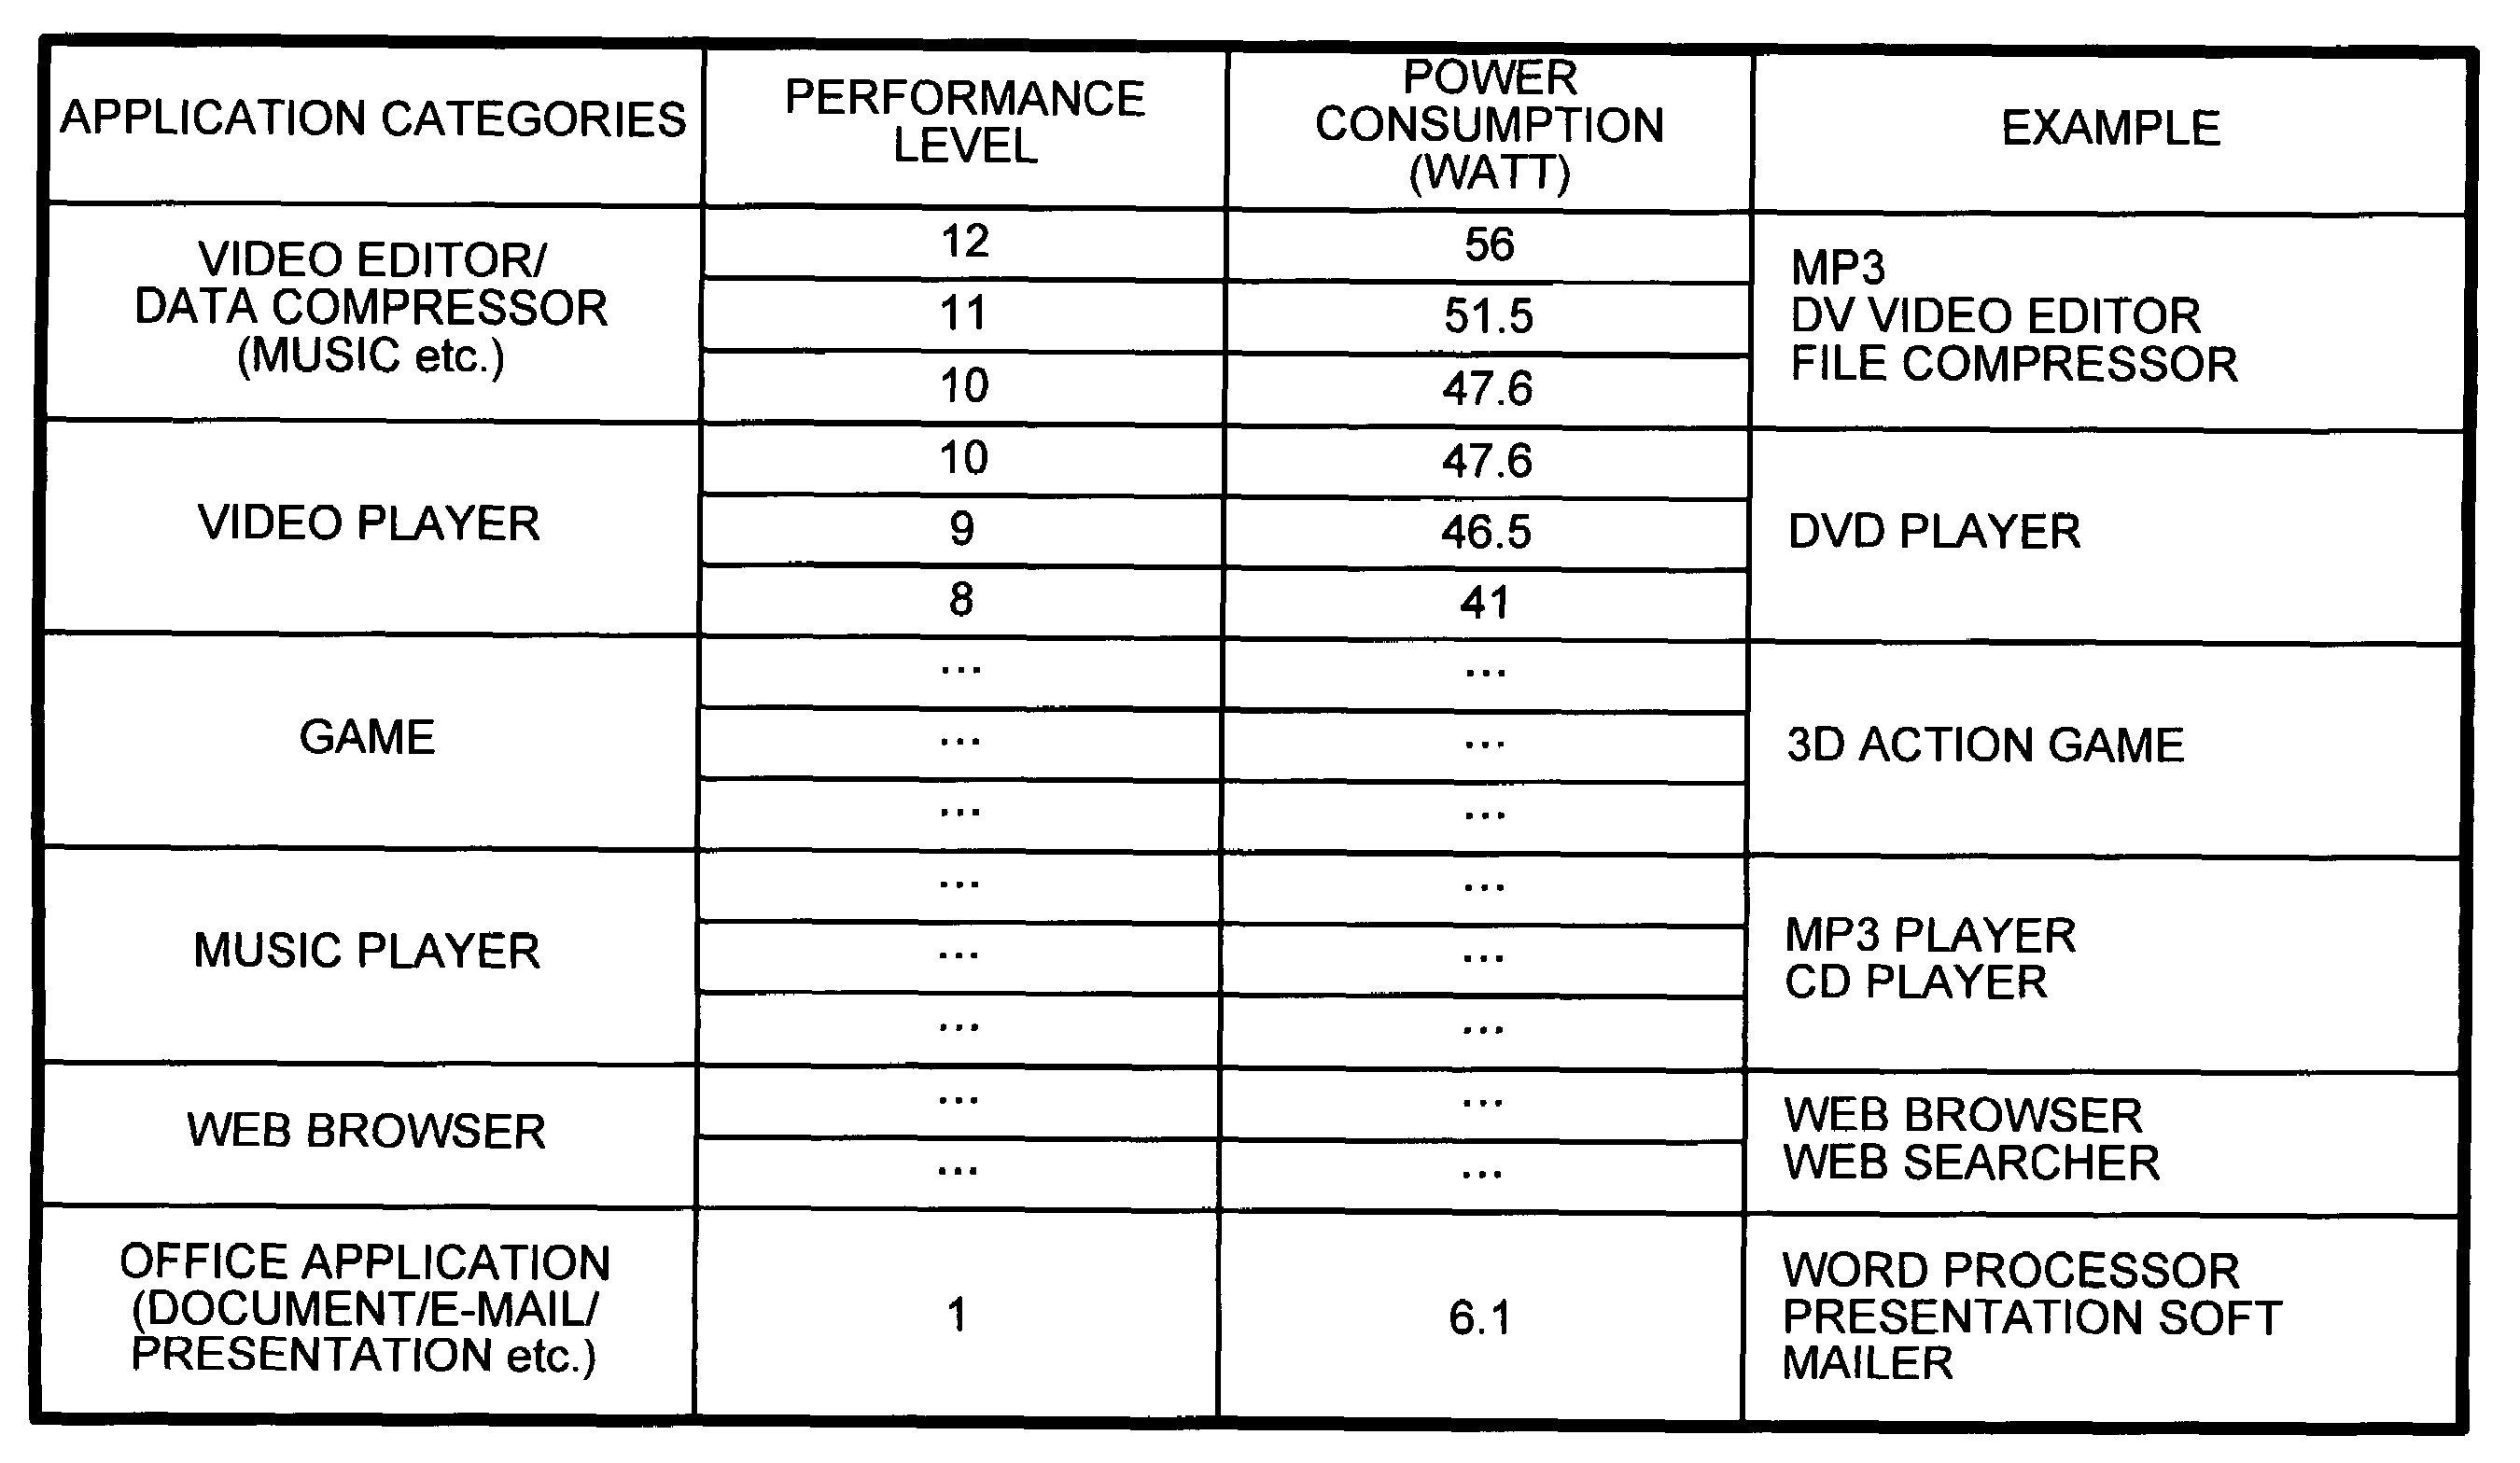 Performance controller of electronic device, performance controlling method and computer program product